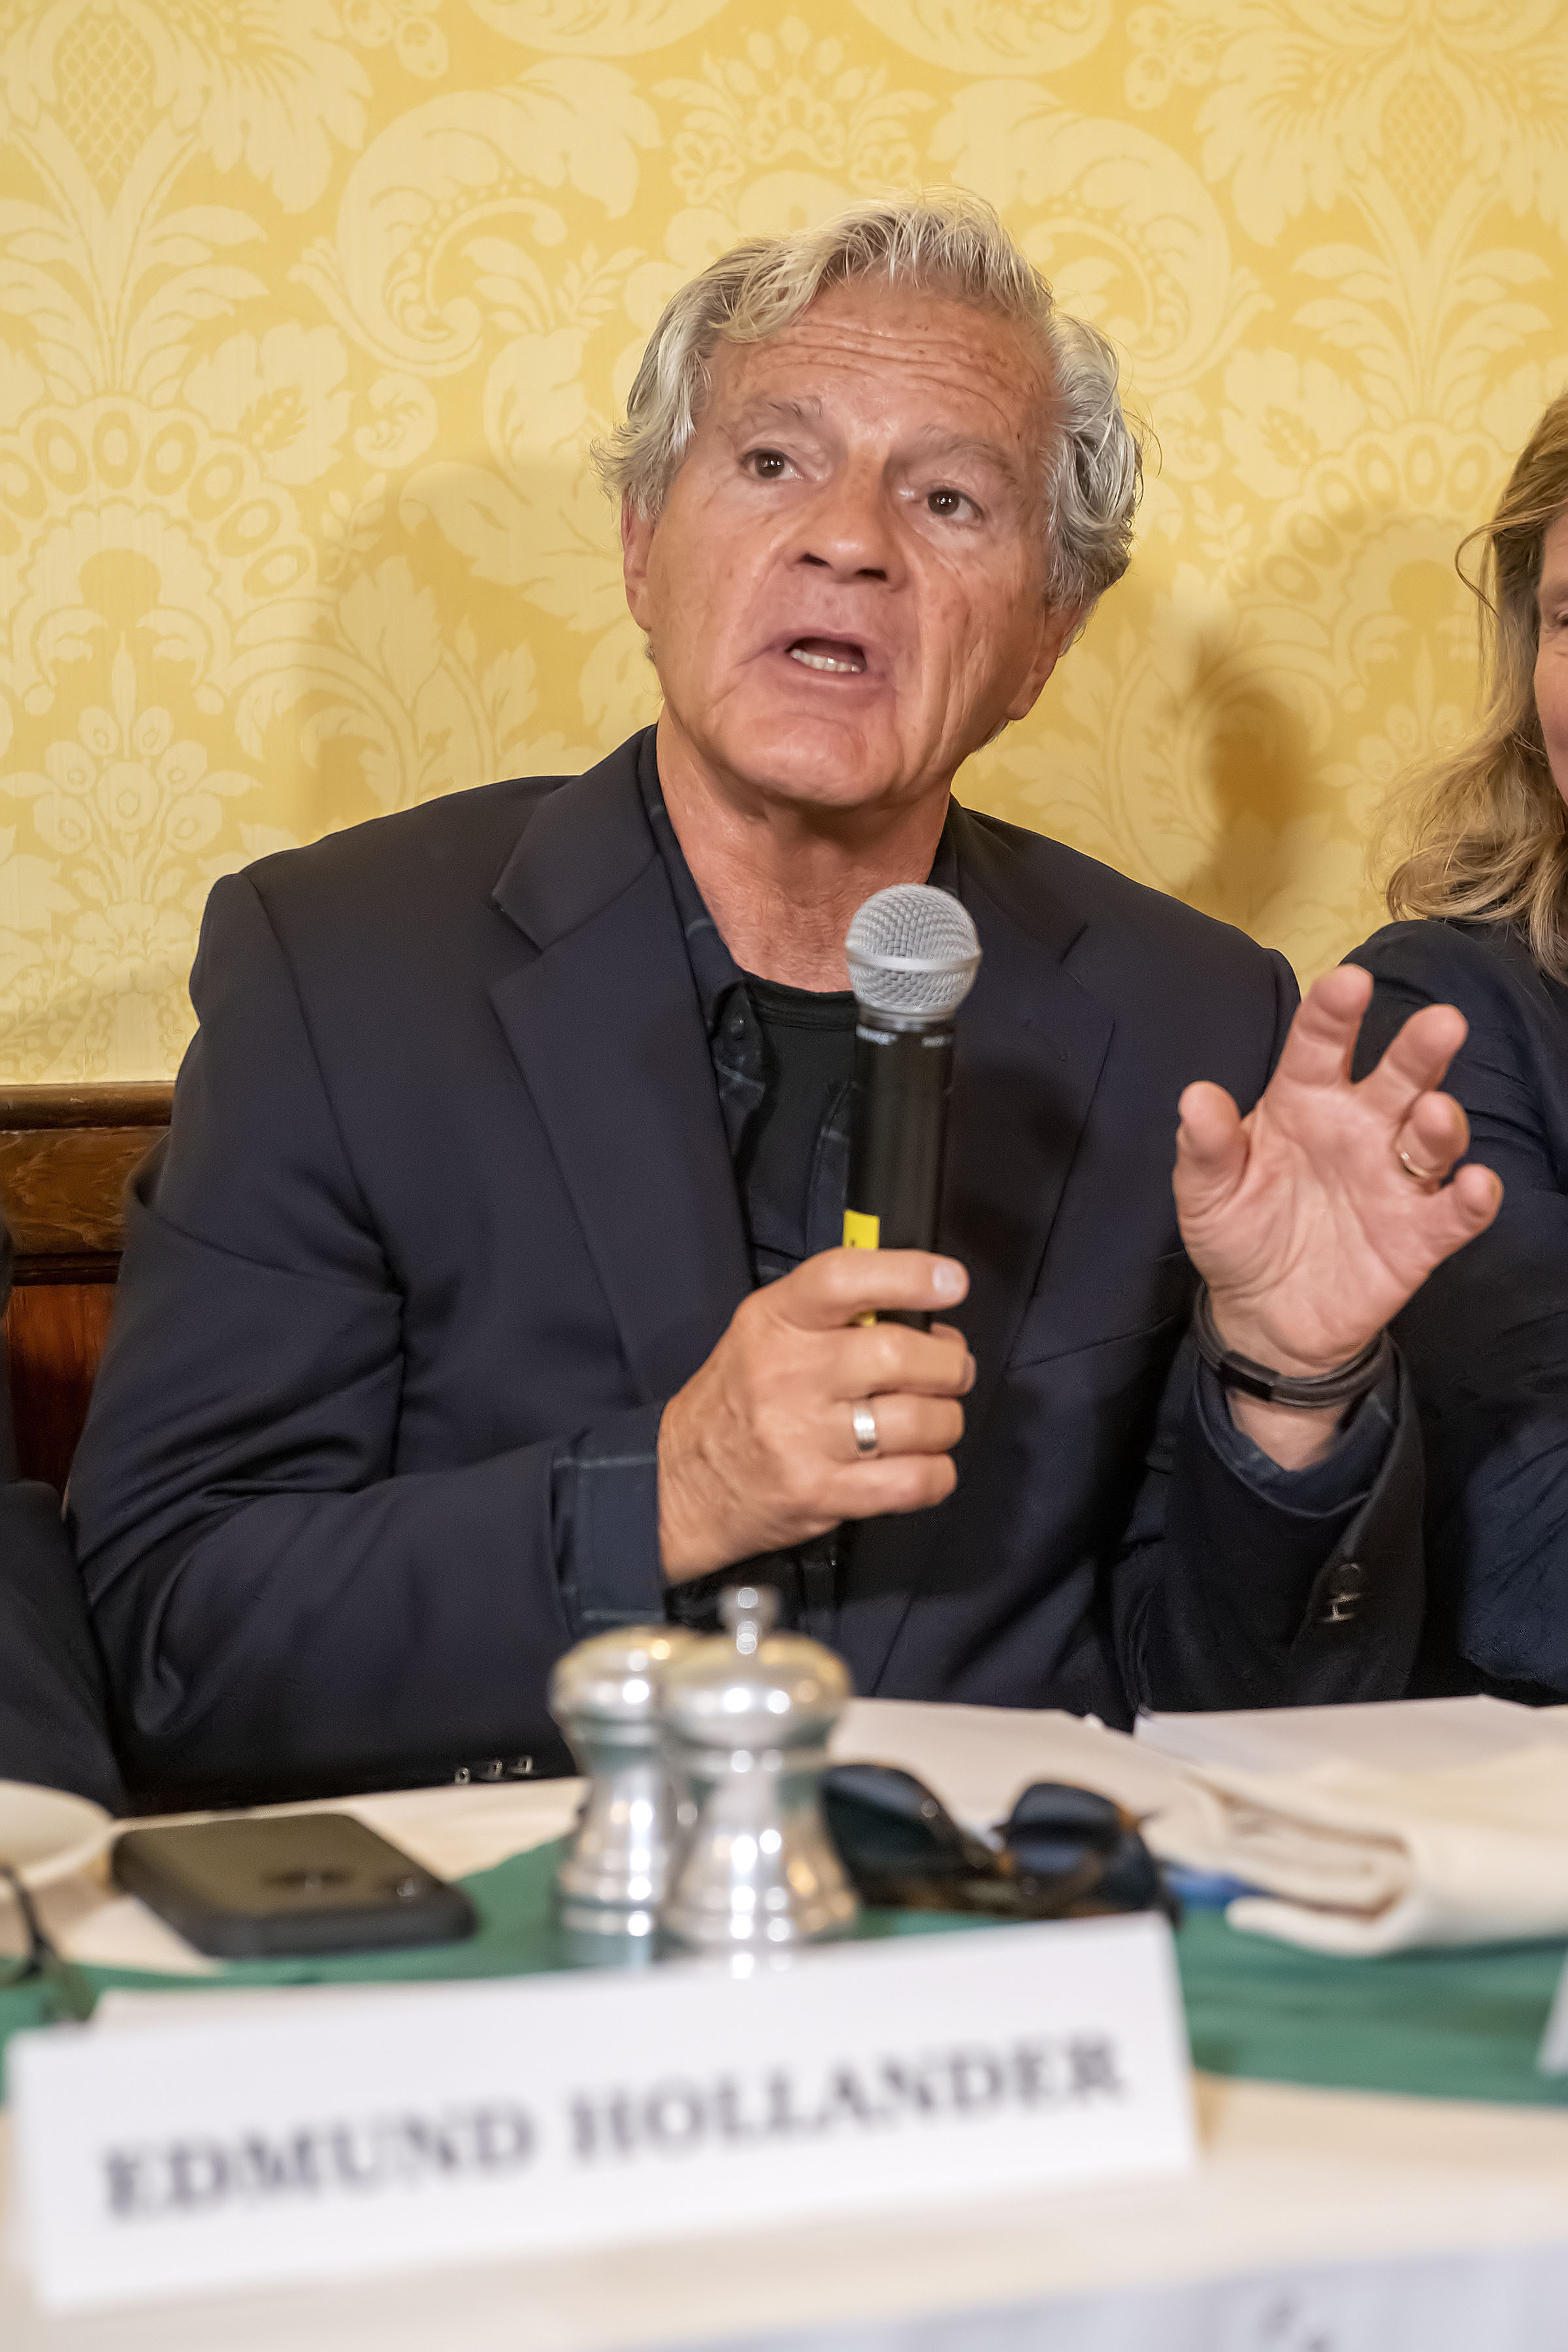 Panelist Jim Larocca speaks during the Express Sessions - Sag Harbor Public Spaces event at the American Hotel in Sag Harbor on Friday.    MICHAEL HELLER